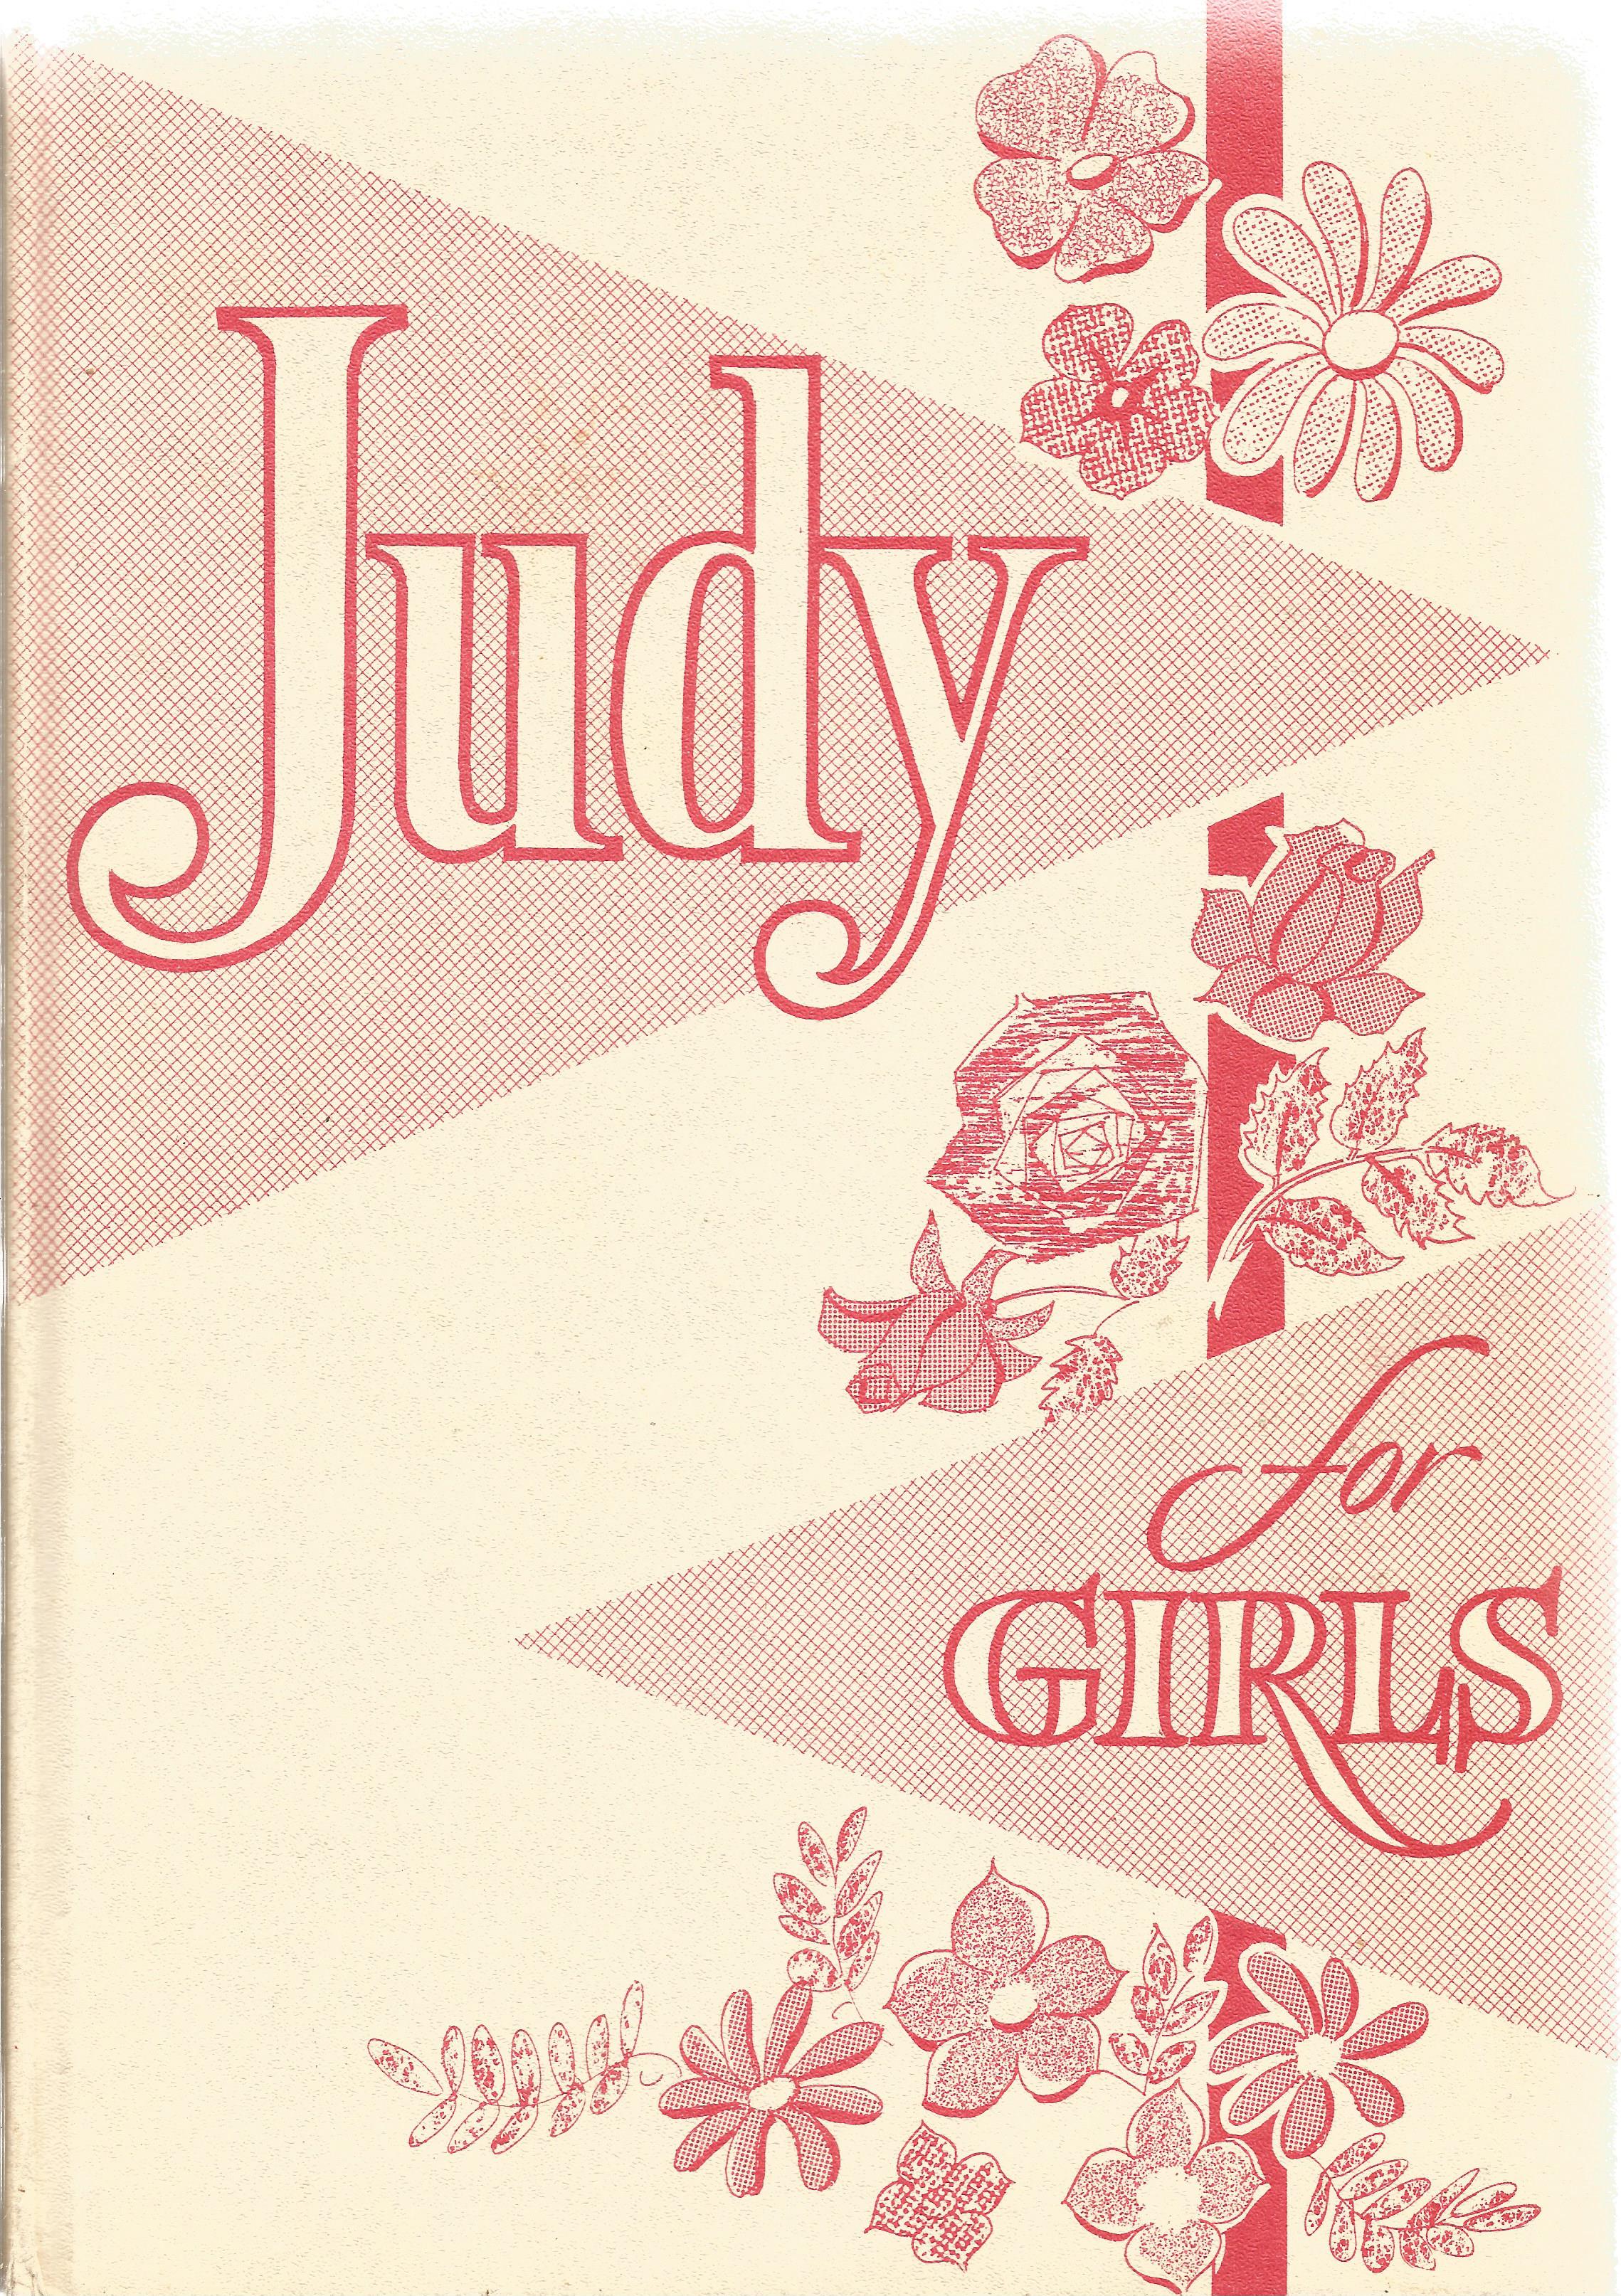 Judy for Girls Annual Hardback Book 1966 published by D C Thomson and Co Ltd some ageing good